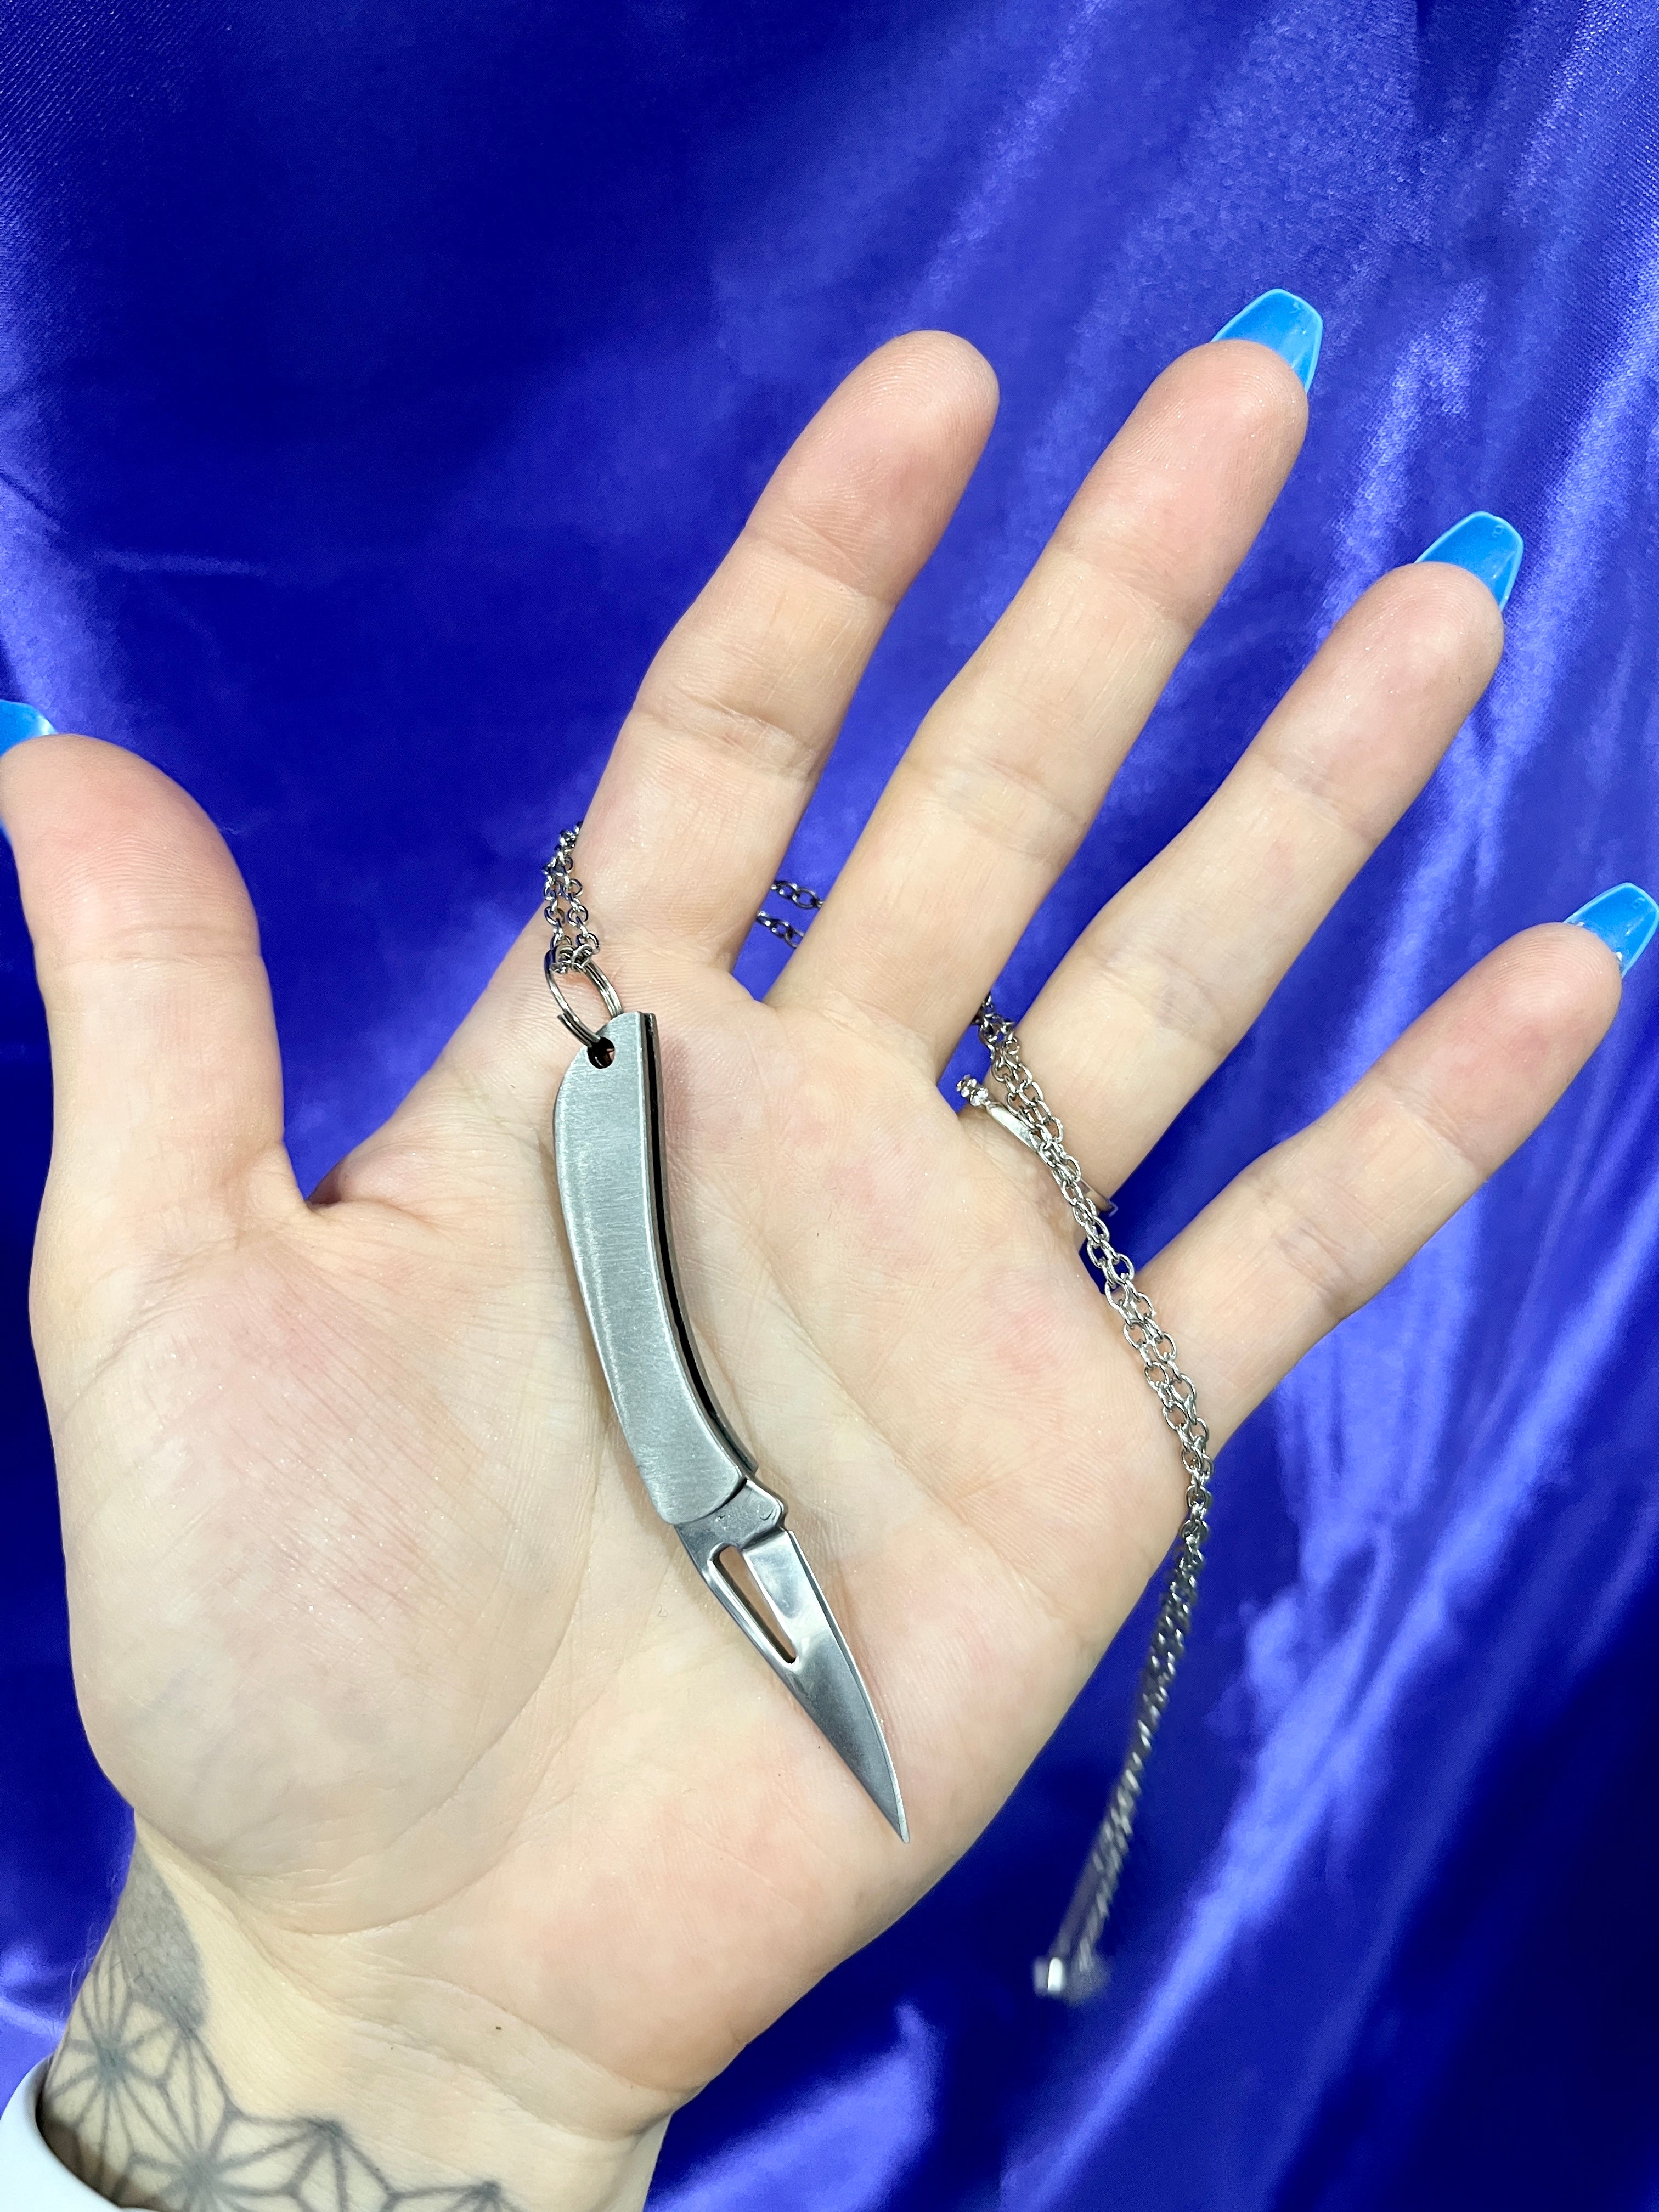 Mini Knife Necklace - Blades For Babes Folding Blade